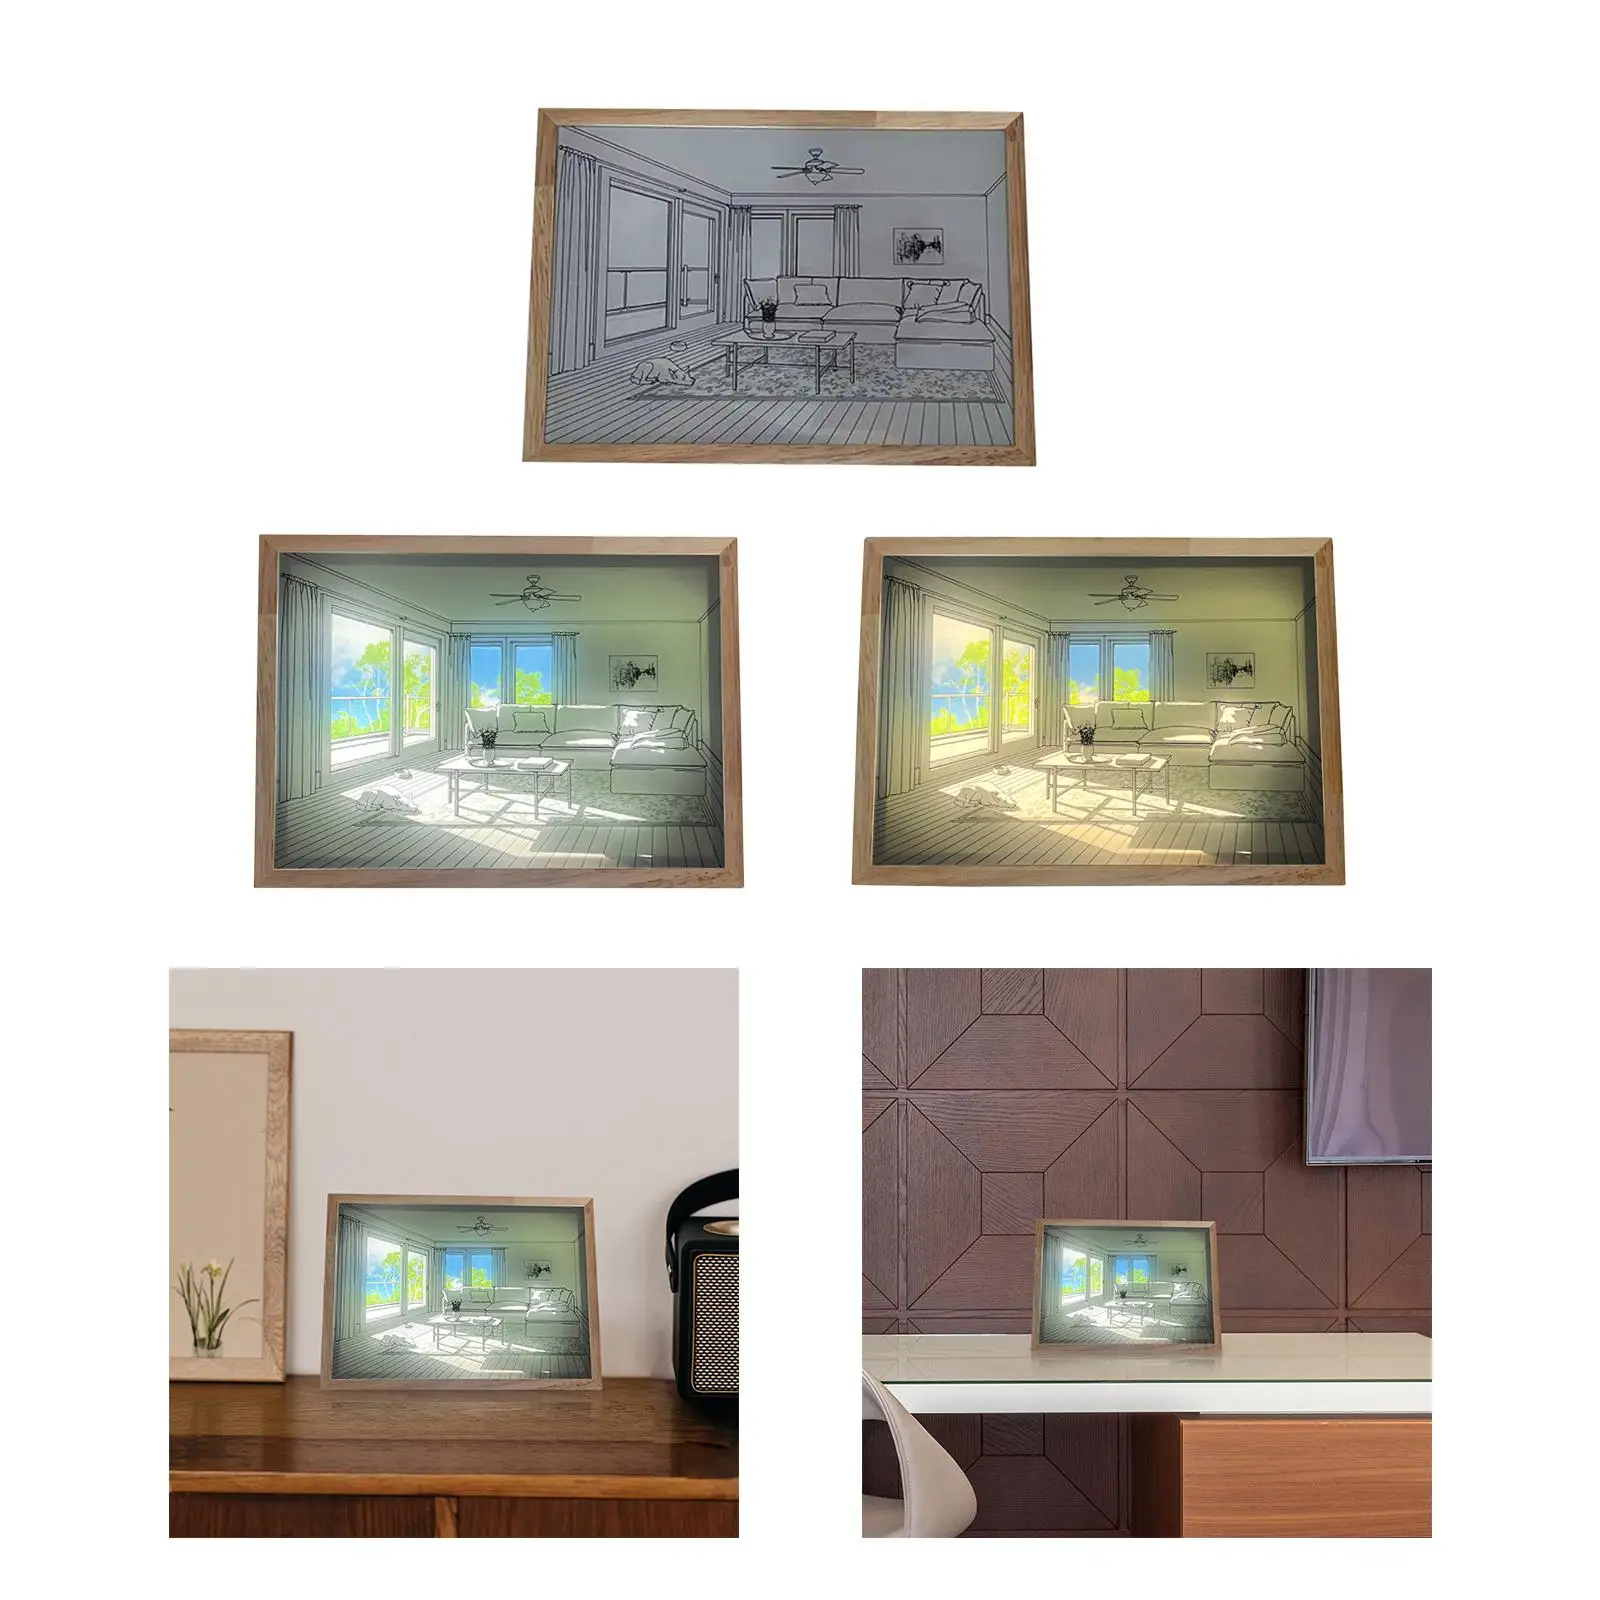 LED glowing photo frame illuminate your space with lighting, paintings, shadow